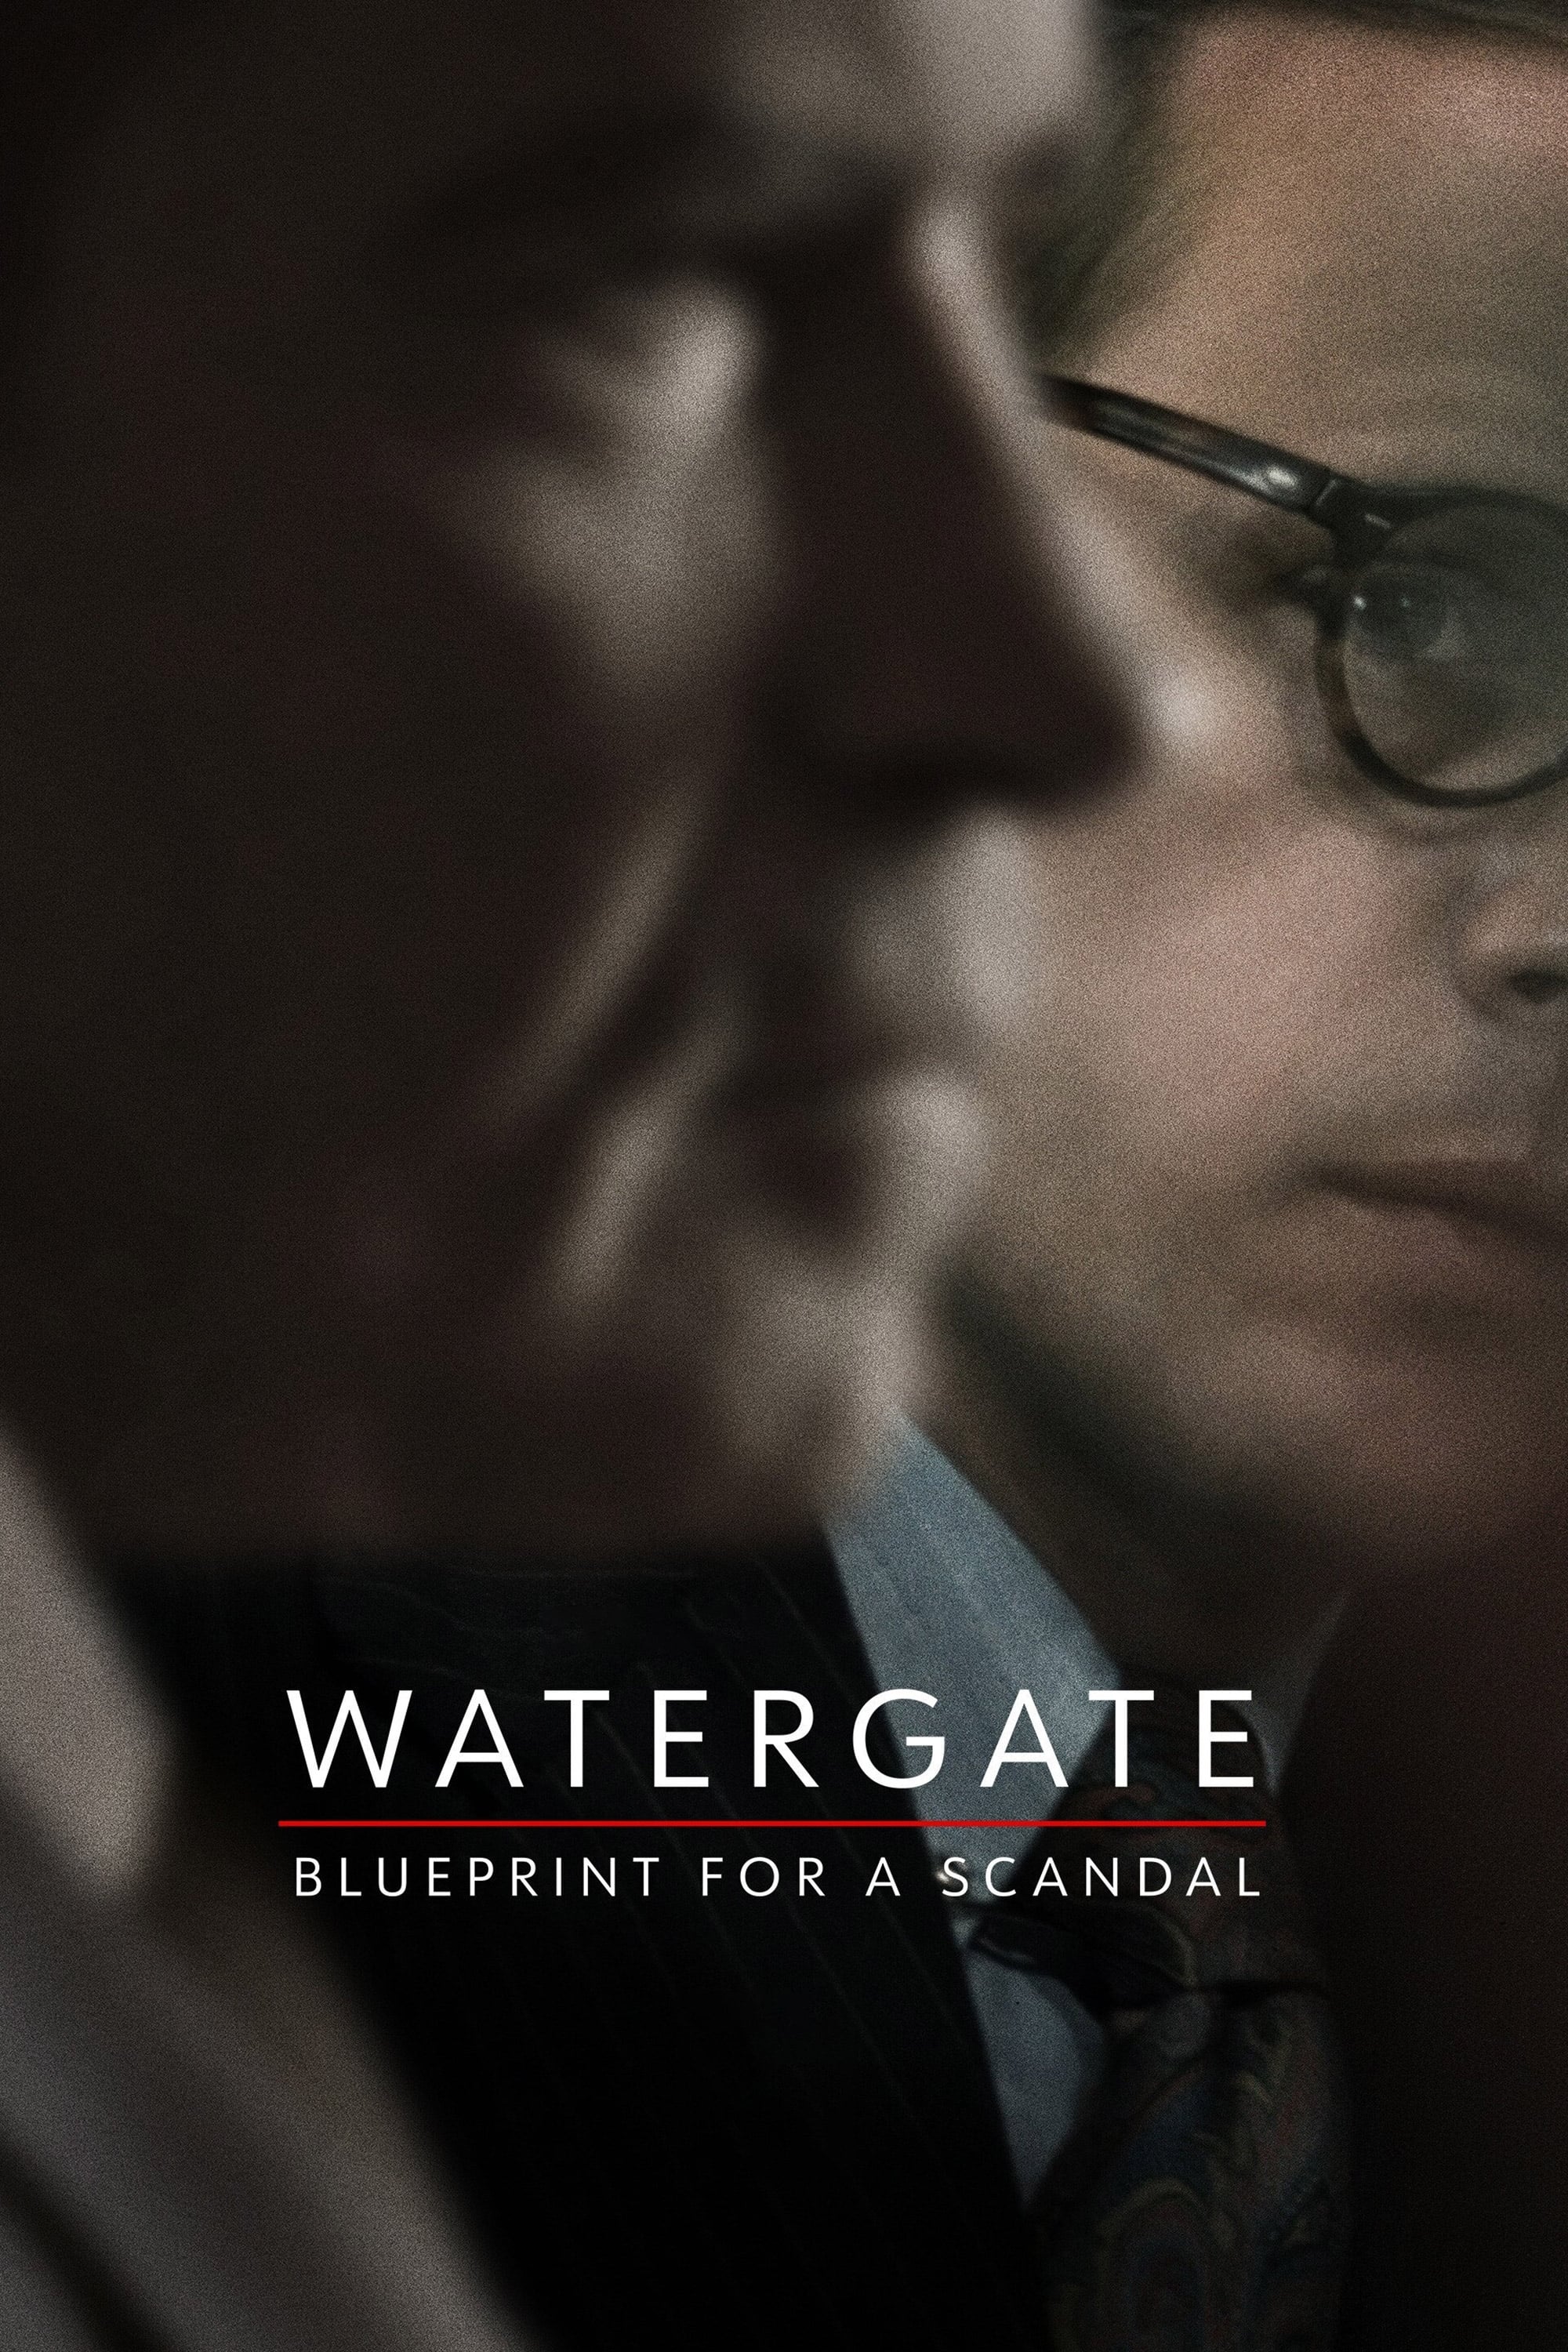 Watergate: Blueprint for a Scandal TV Shows About Watergate Scandal